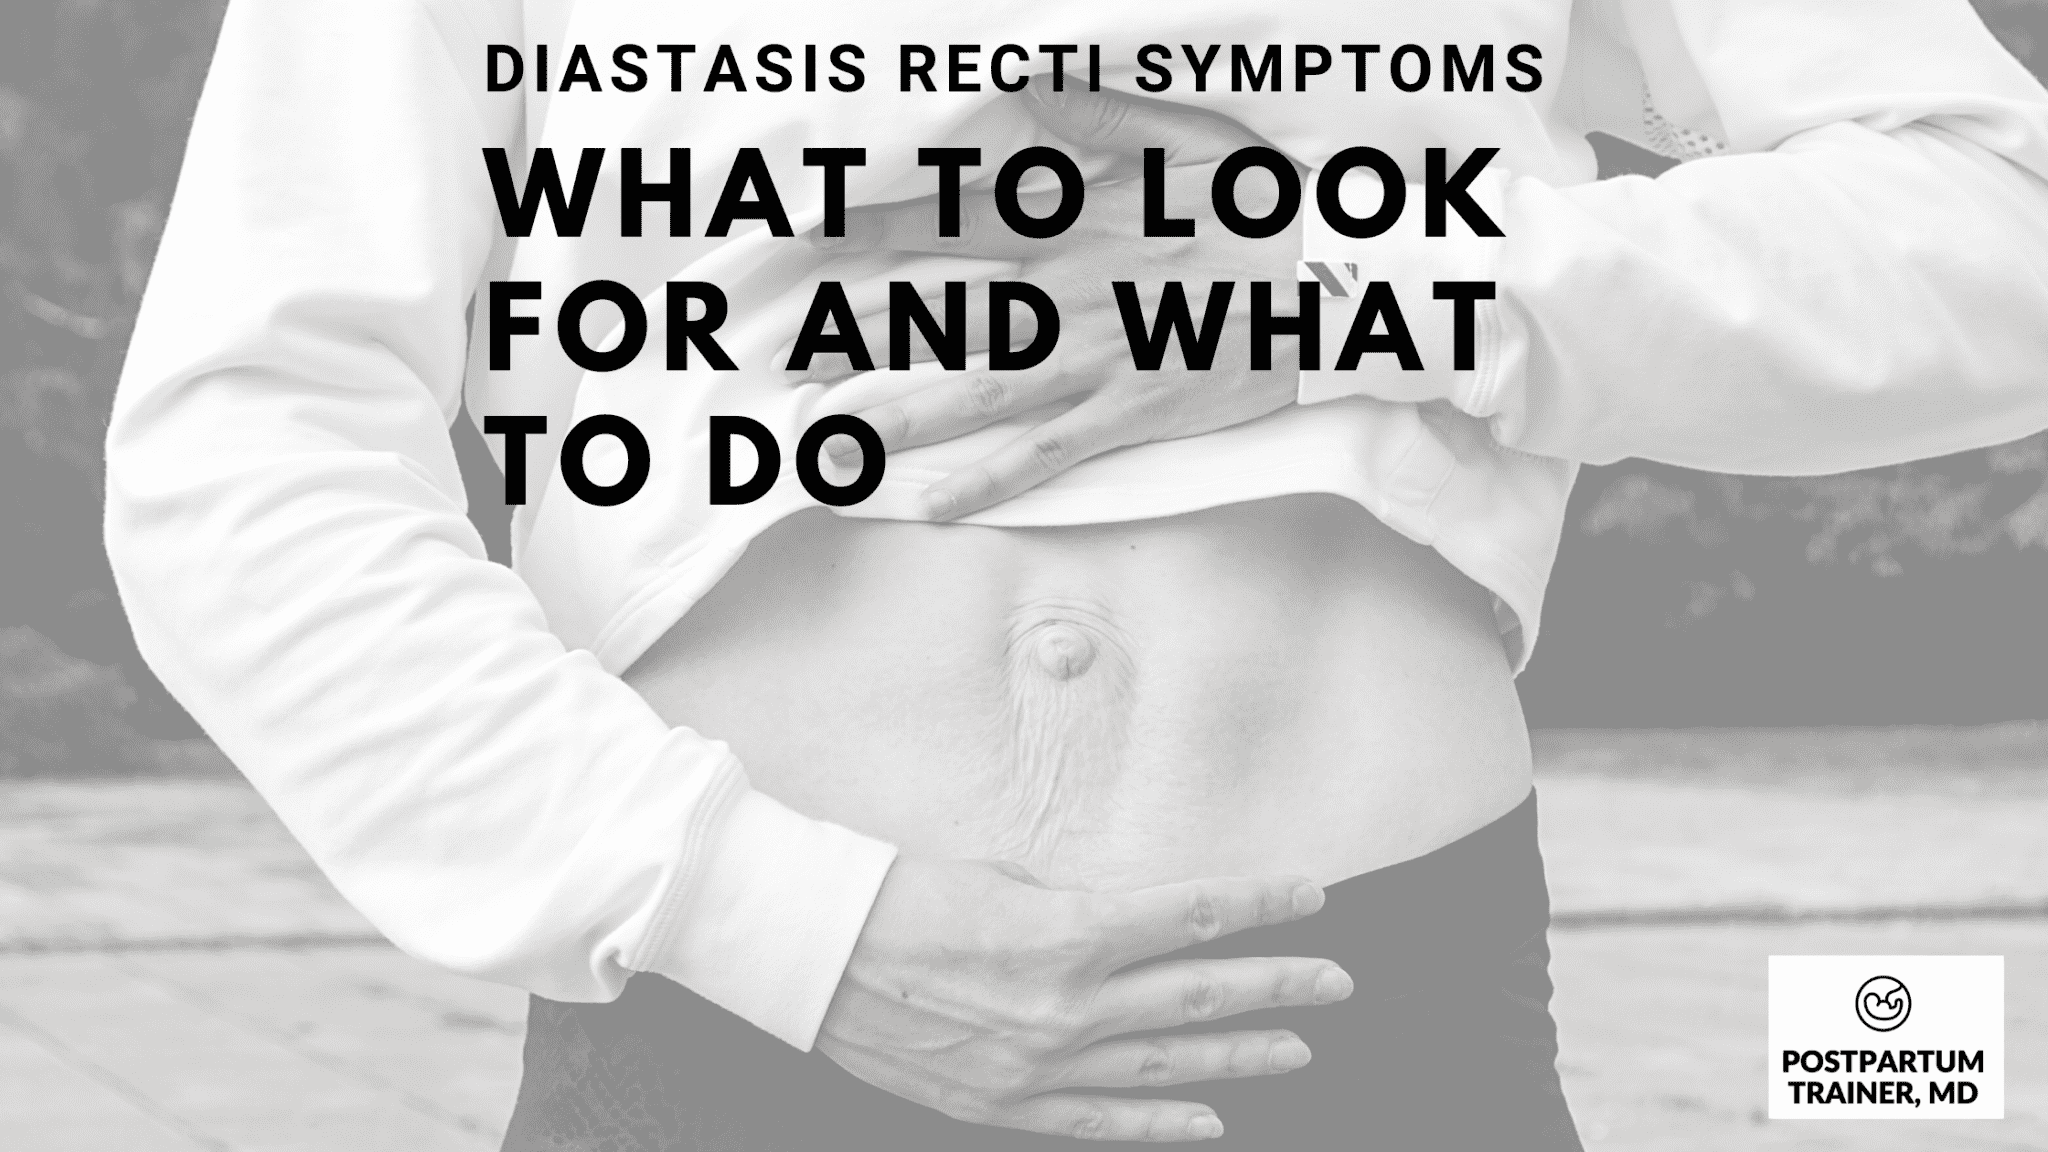 Diastasis Recti Symptoms 5 Things To Look For & What To Do About It